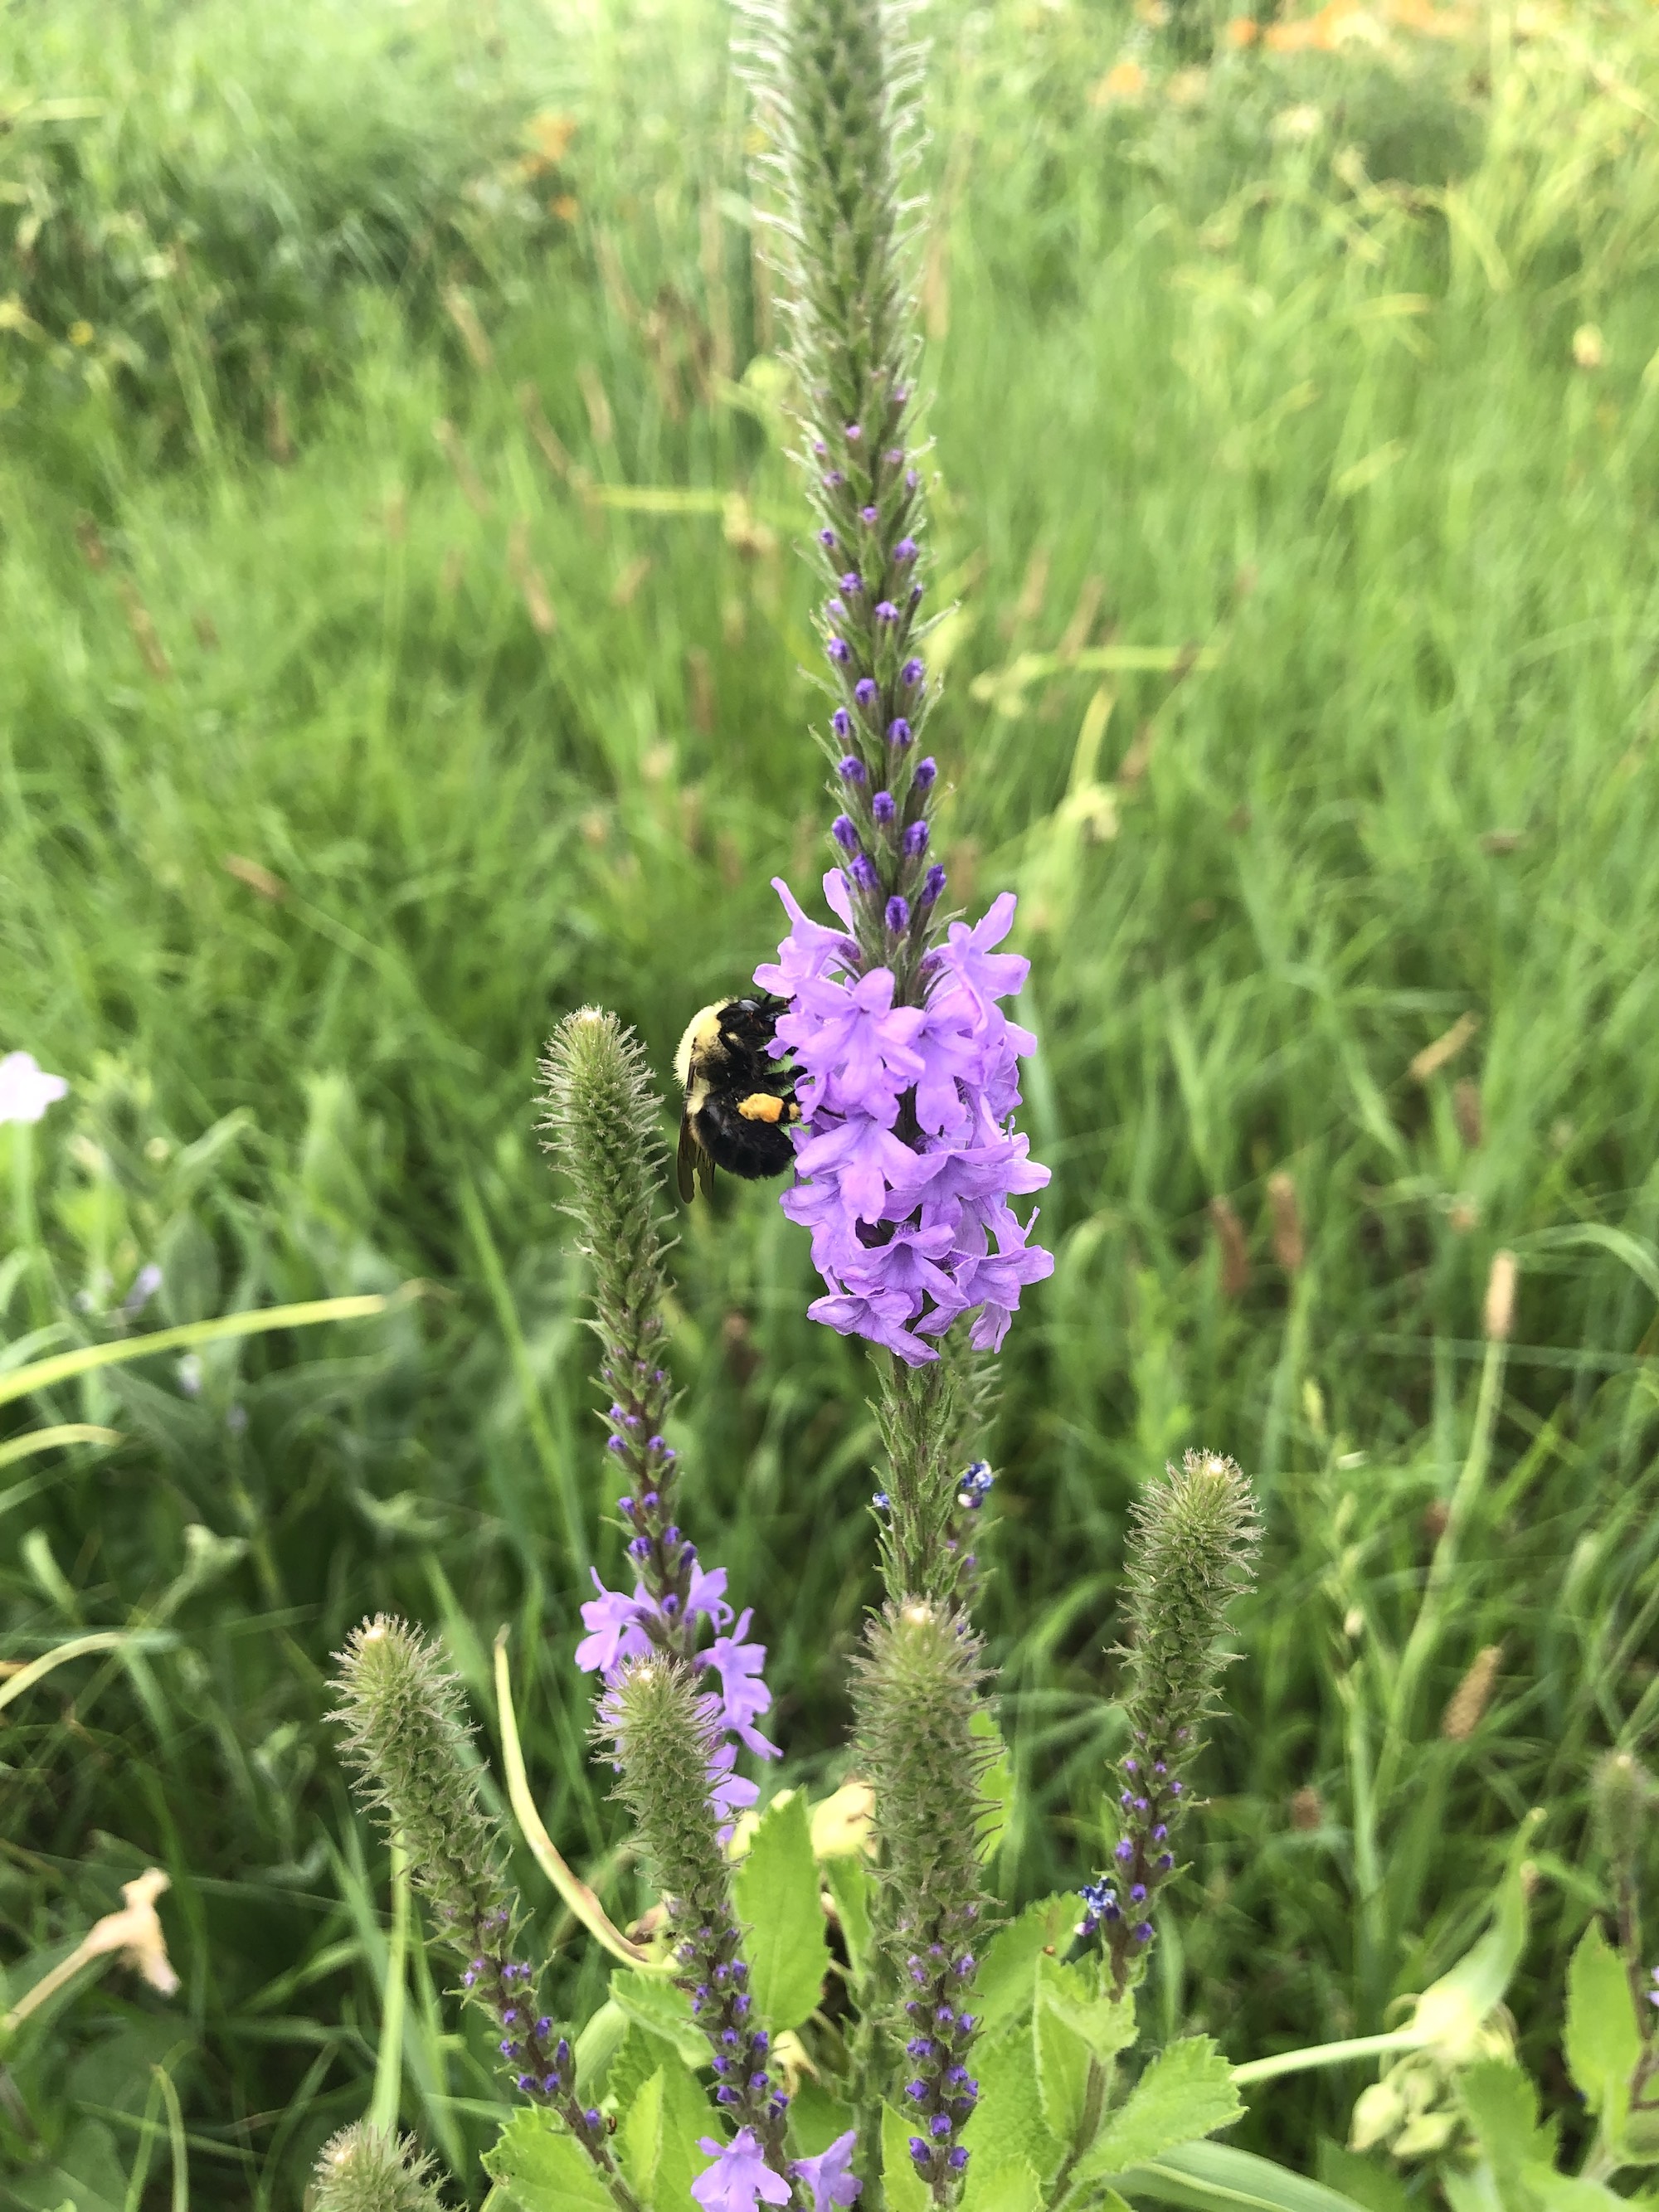 Bumblebee on Hoary Vervain off of Bike Path behind Gregory Street in Madison, Wisconsin on June 28, 2021.